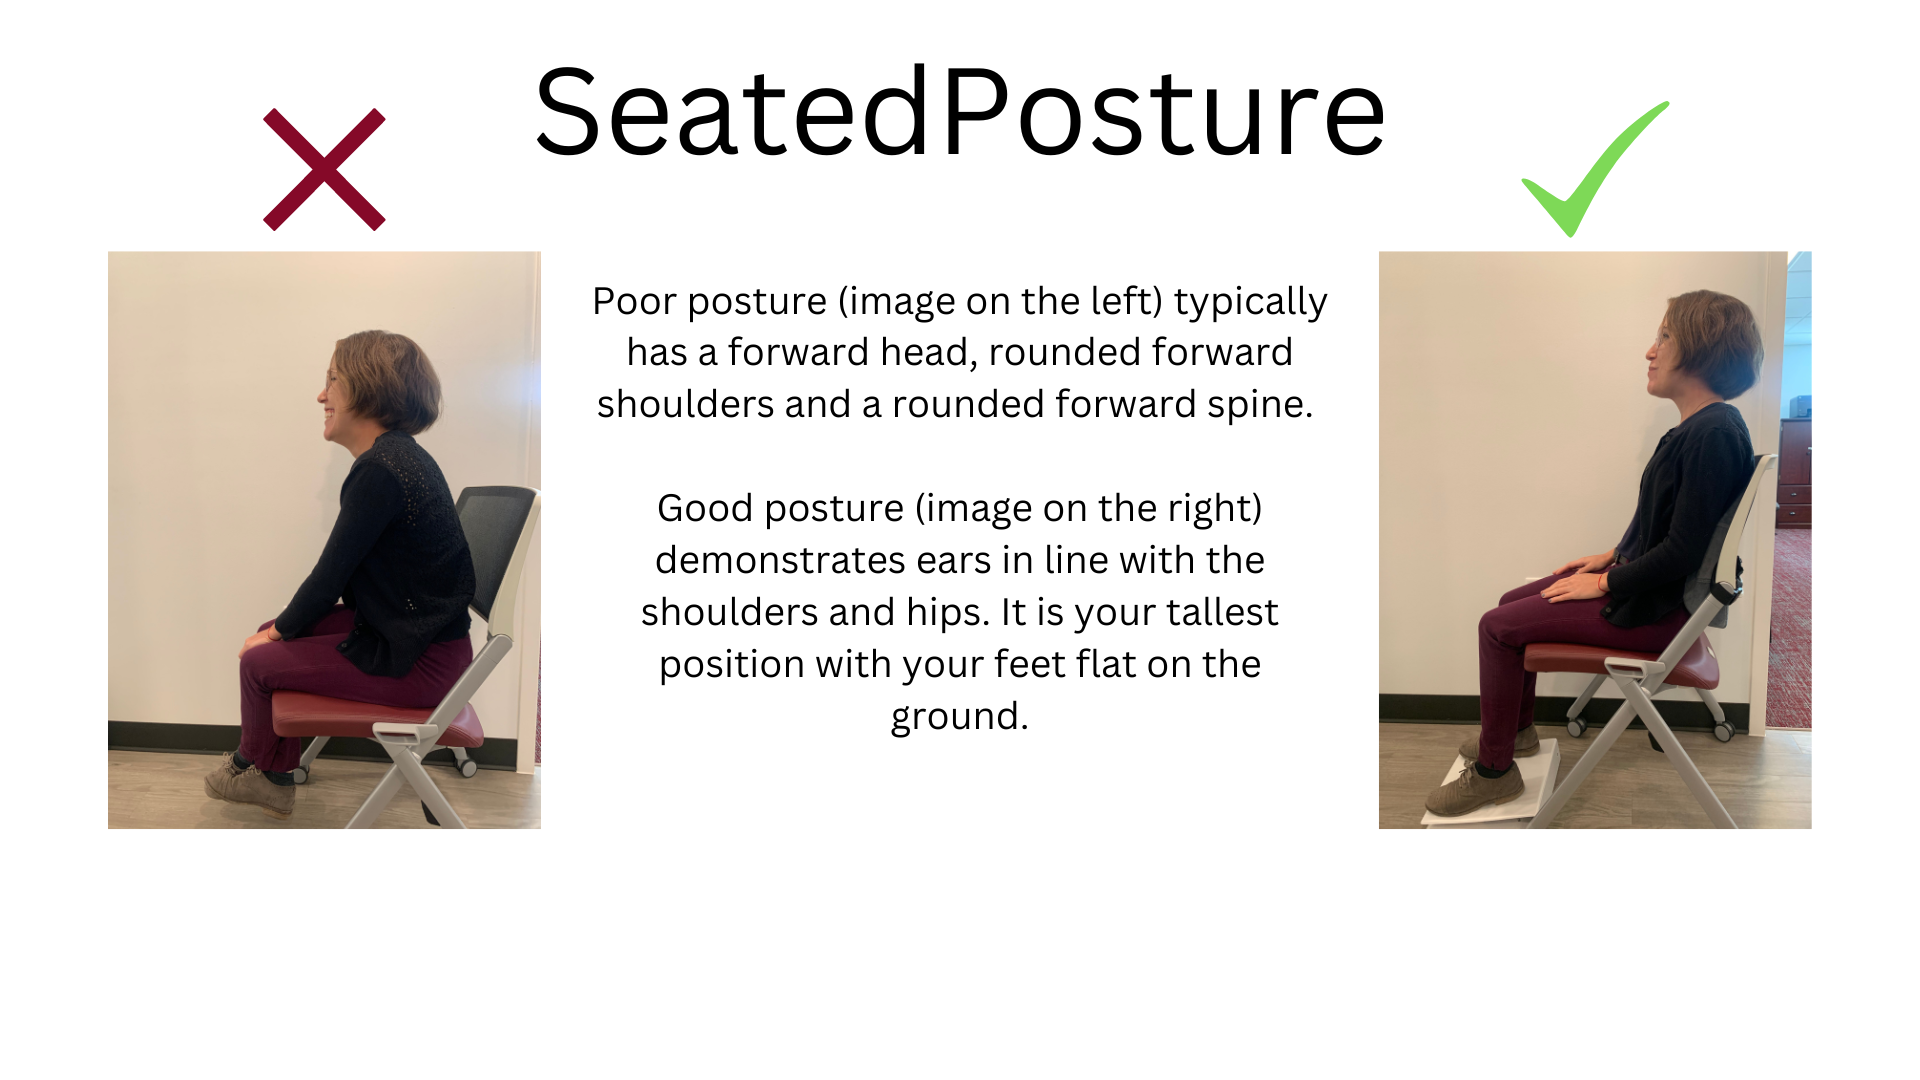 Black text on a white background: "Seated Posture: Poor posture (image on the left) typically has a forward head, rounded forward shoulders and a rounded forward spine. Good posture (image on right) demonstrates ears in line with the shoulders and hips. It is your tallest position with your feet flat on the ground." The images are of a woman seated in a chair with both poor and good posture.